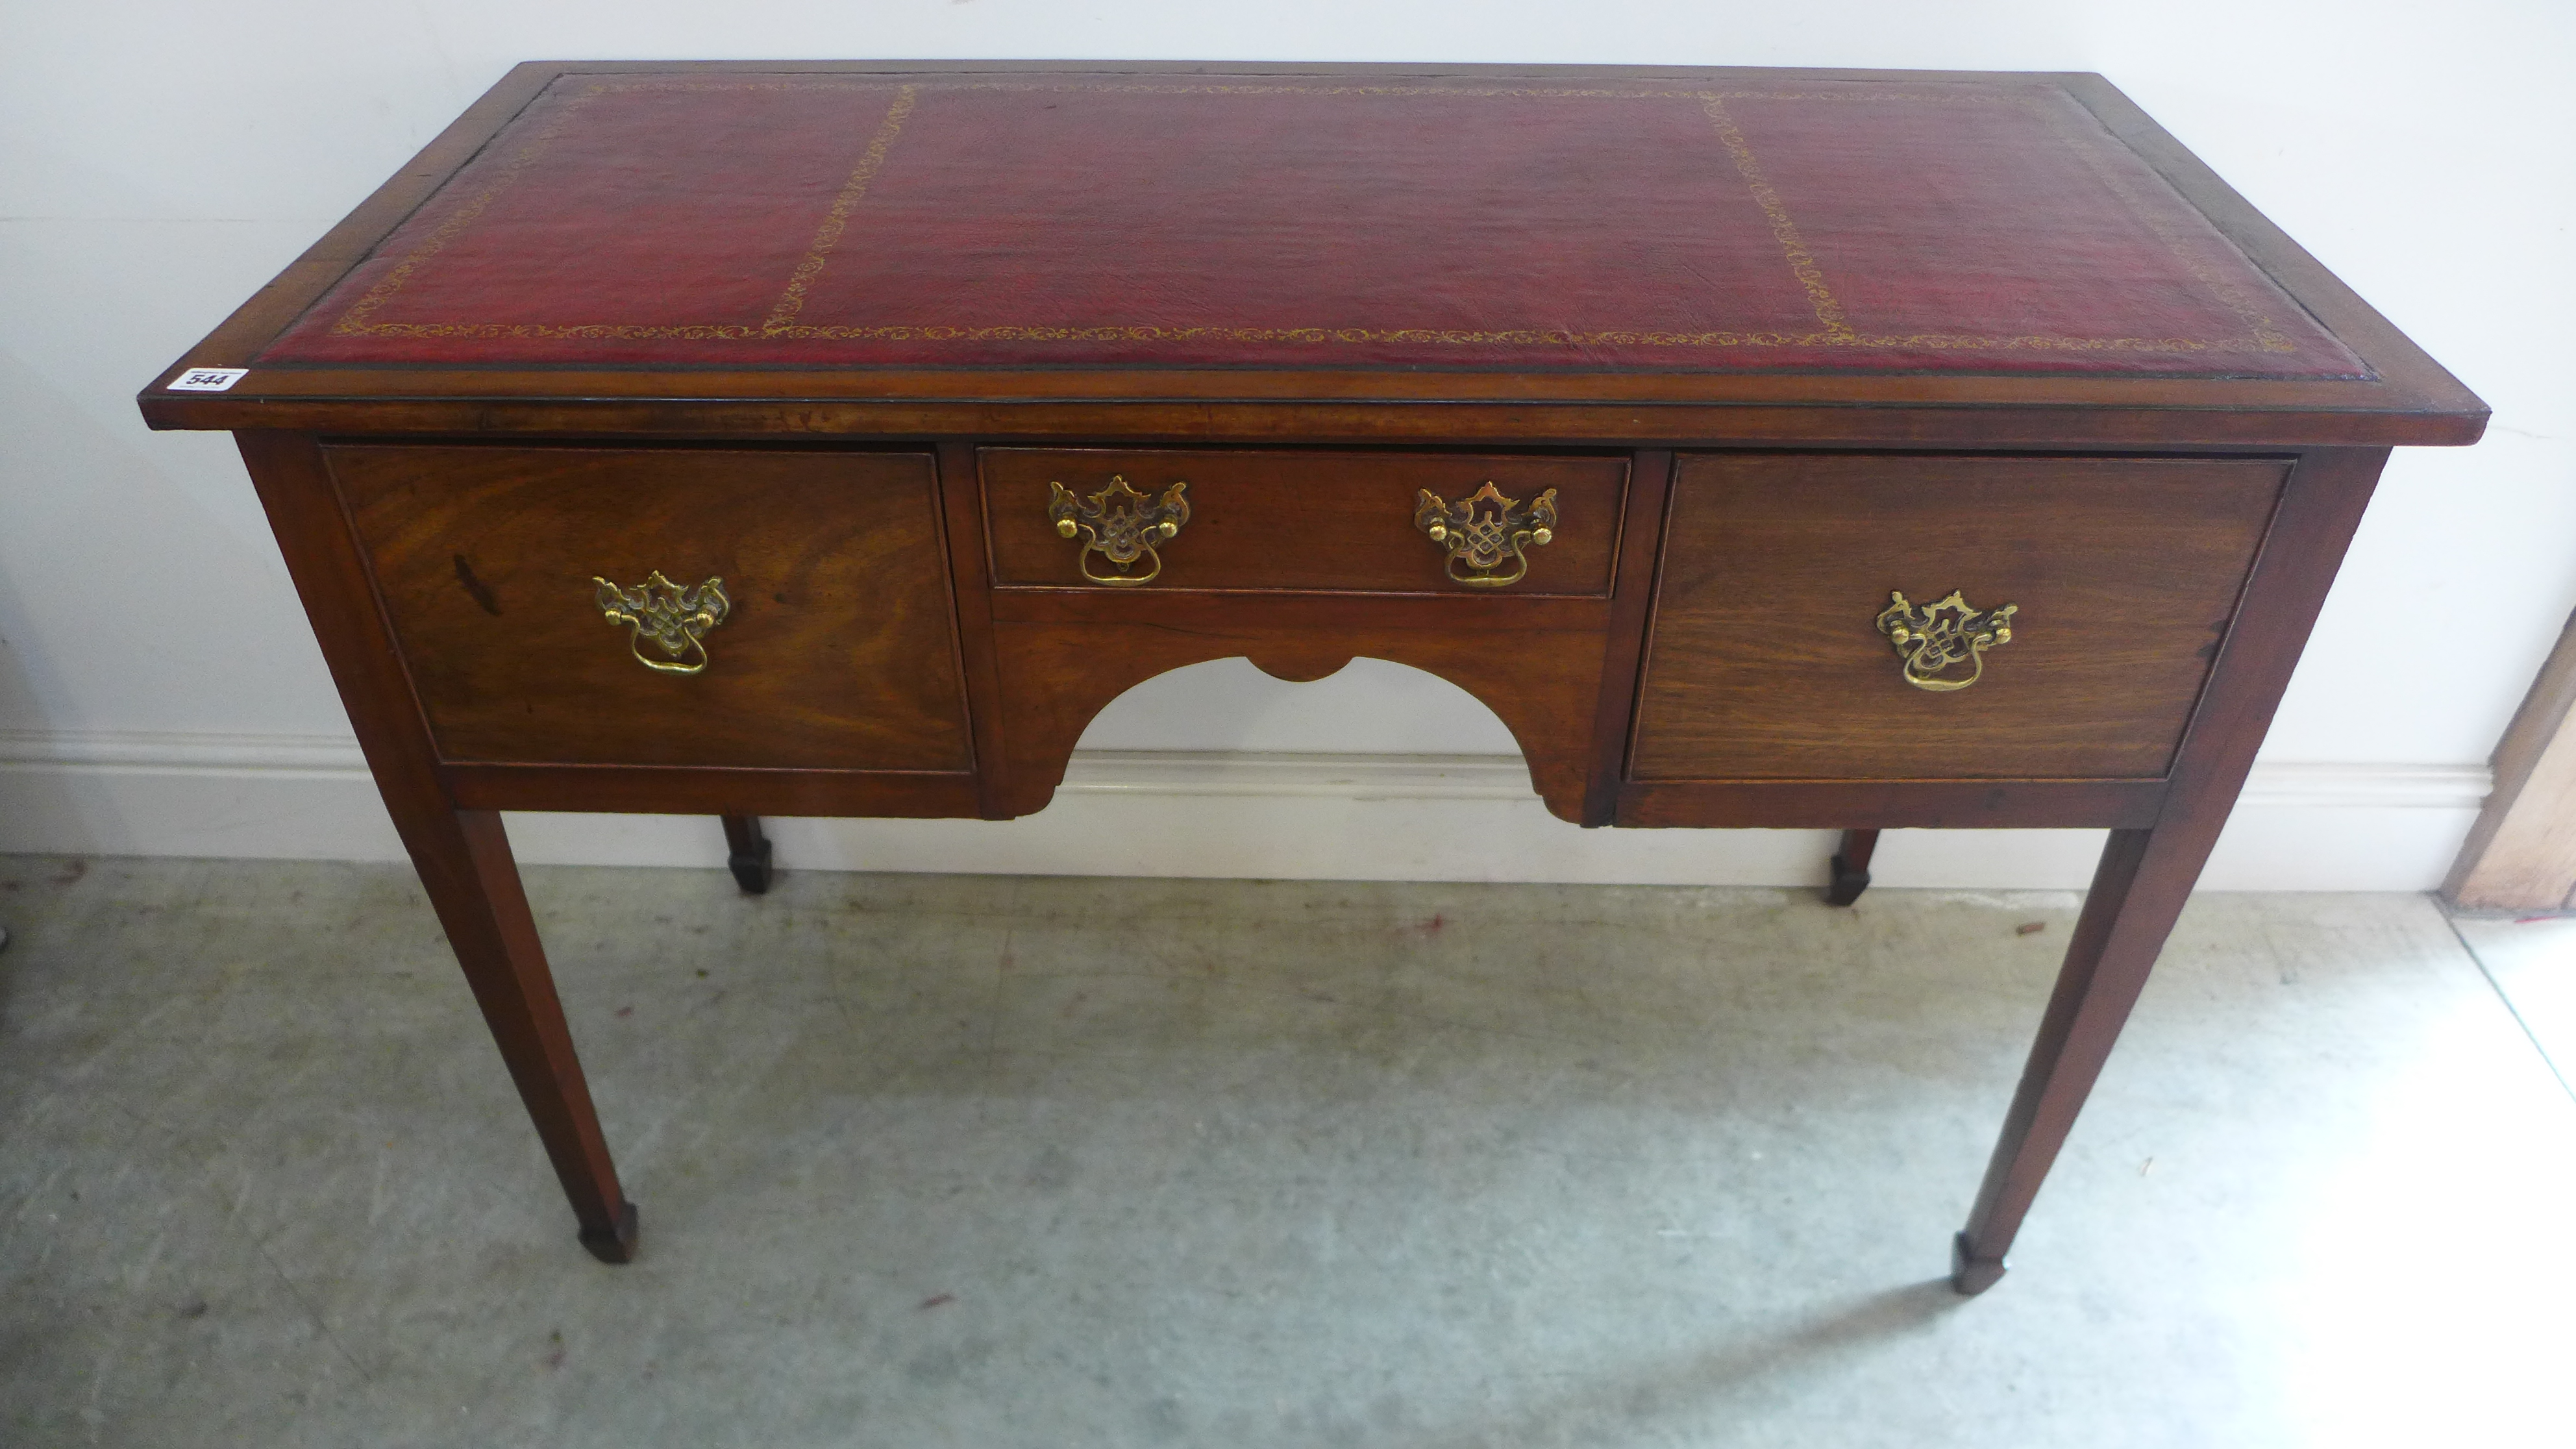 An Edwardian mahogany leather top side table desk with three drawers - Height 79cm x Width 113cm x